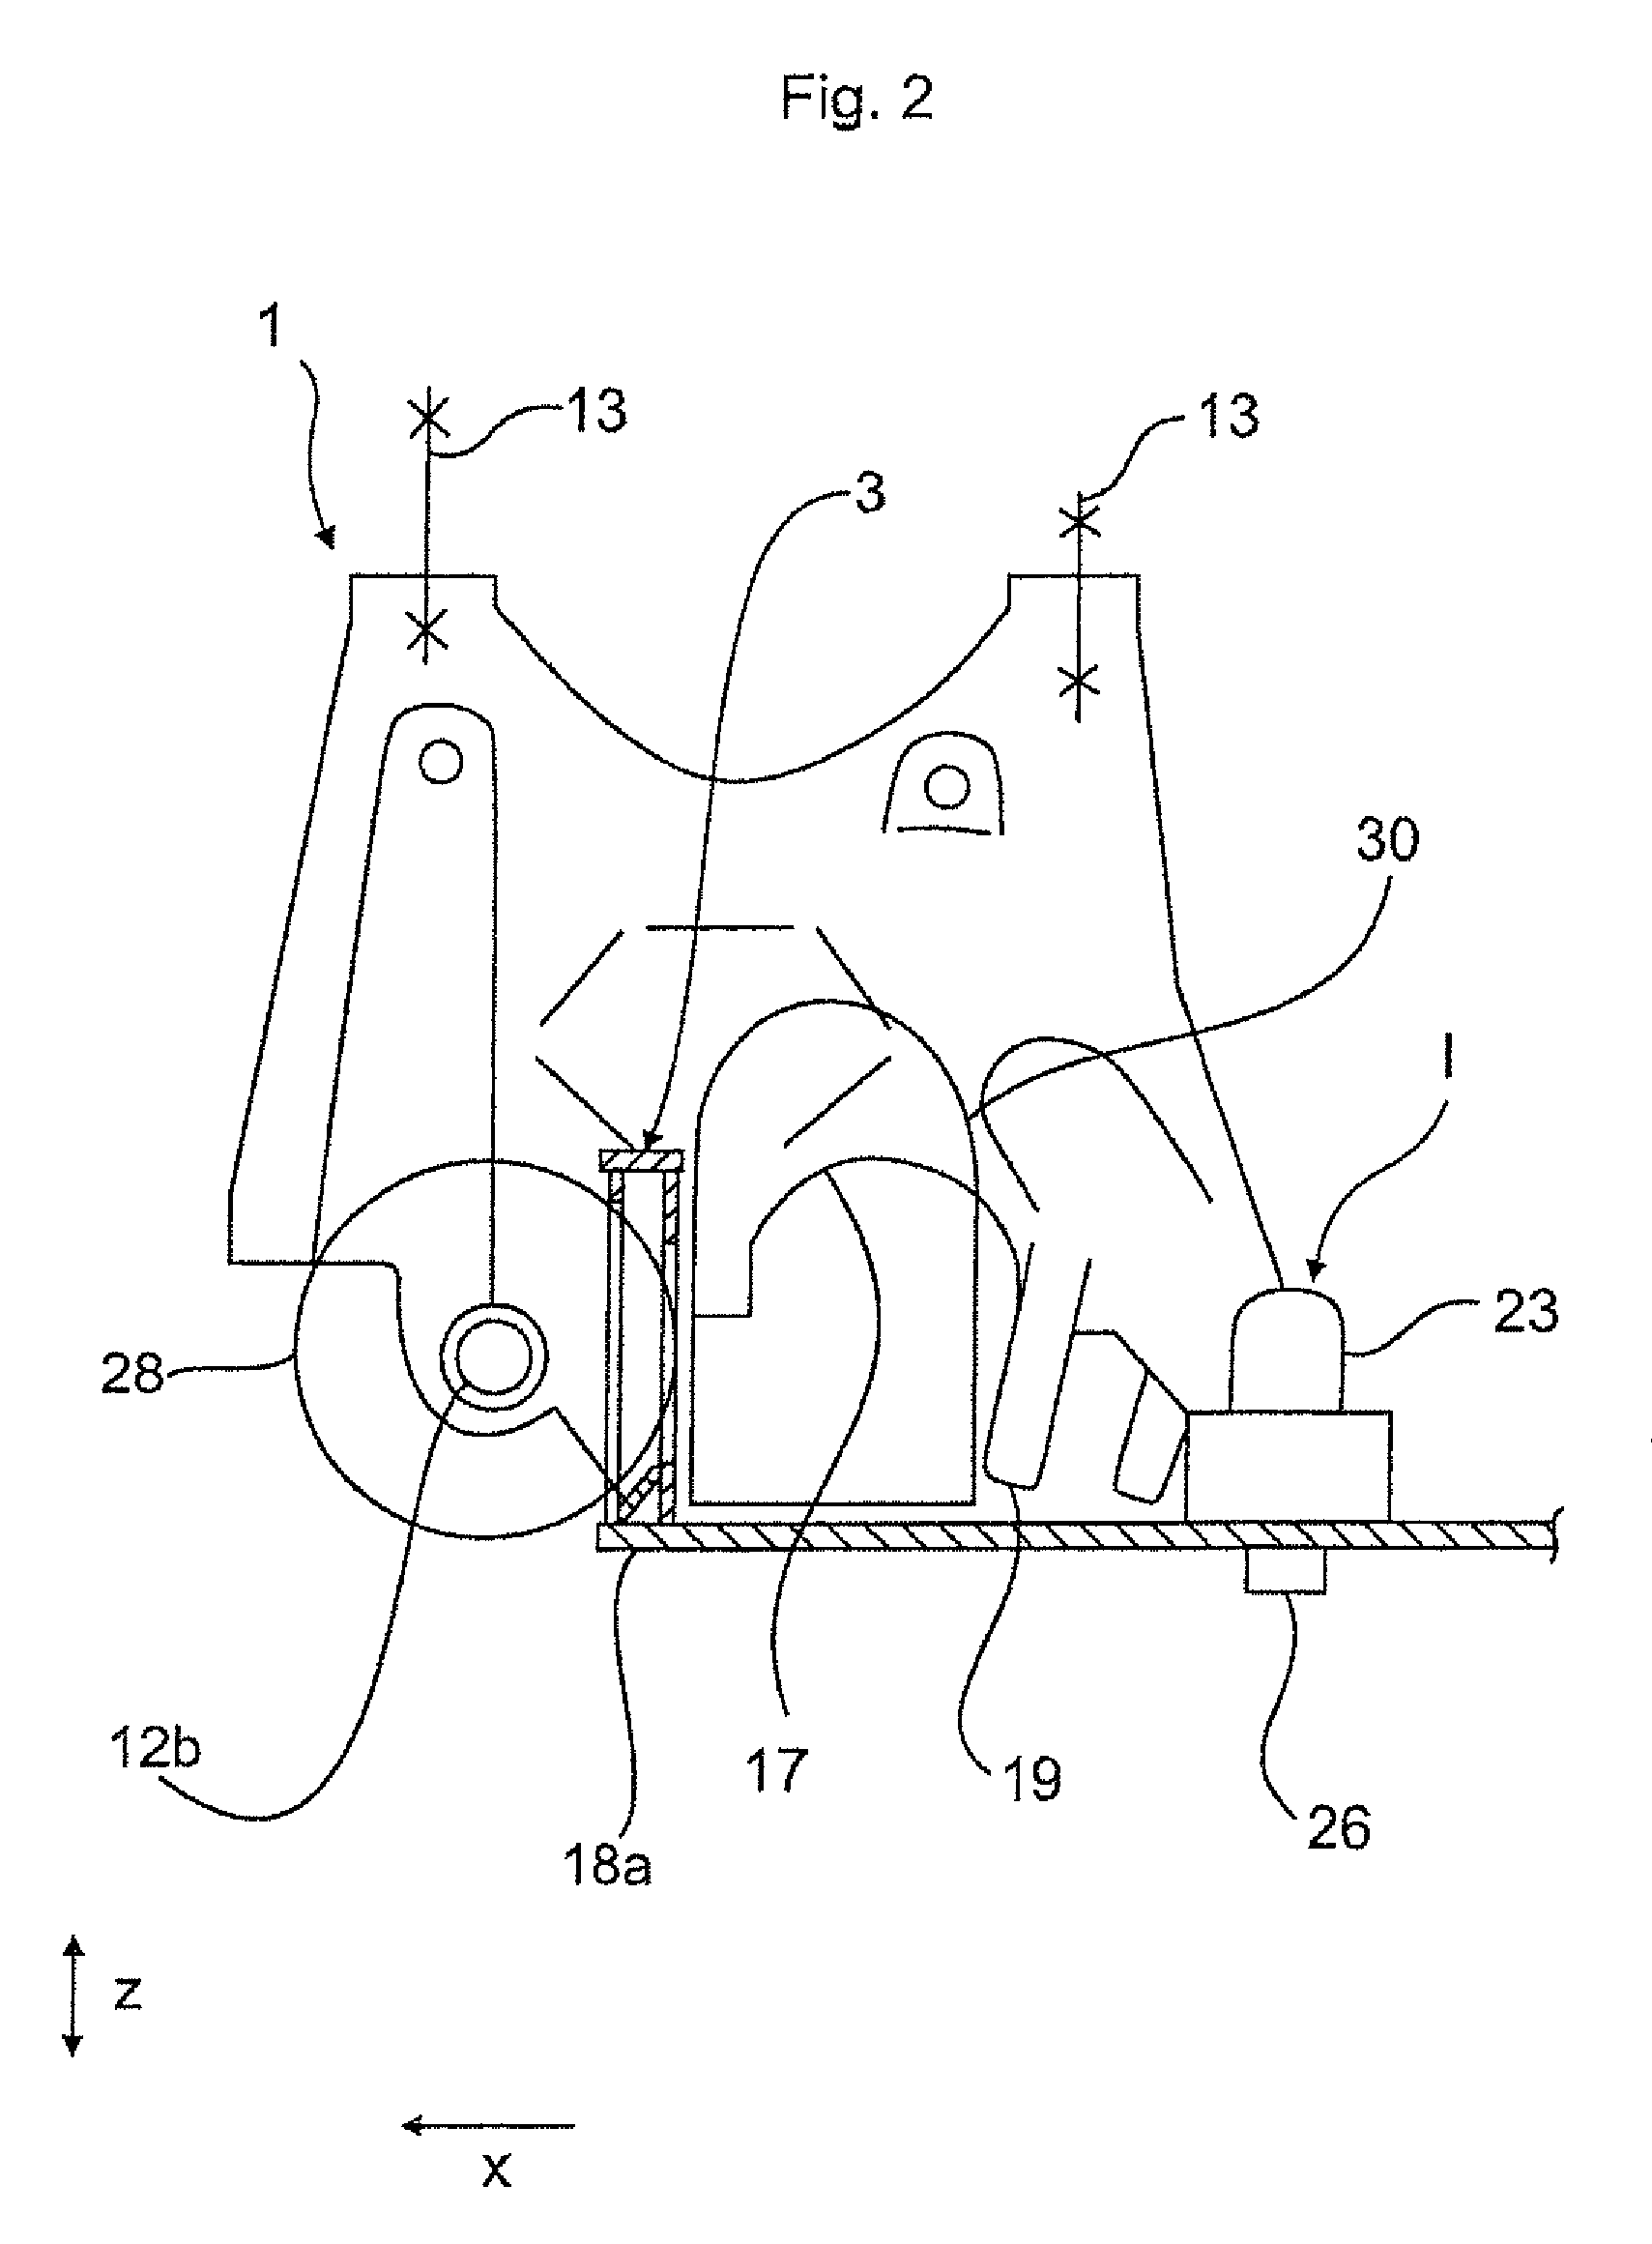 Subframe for a motor vehicle